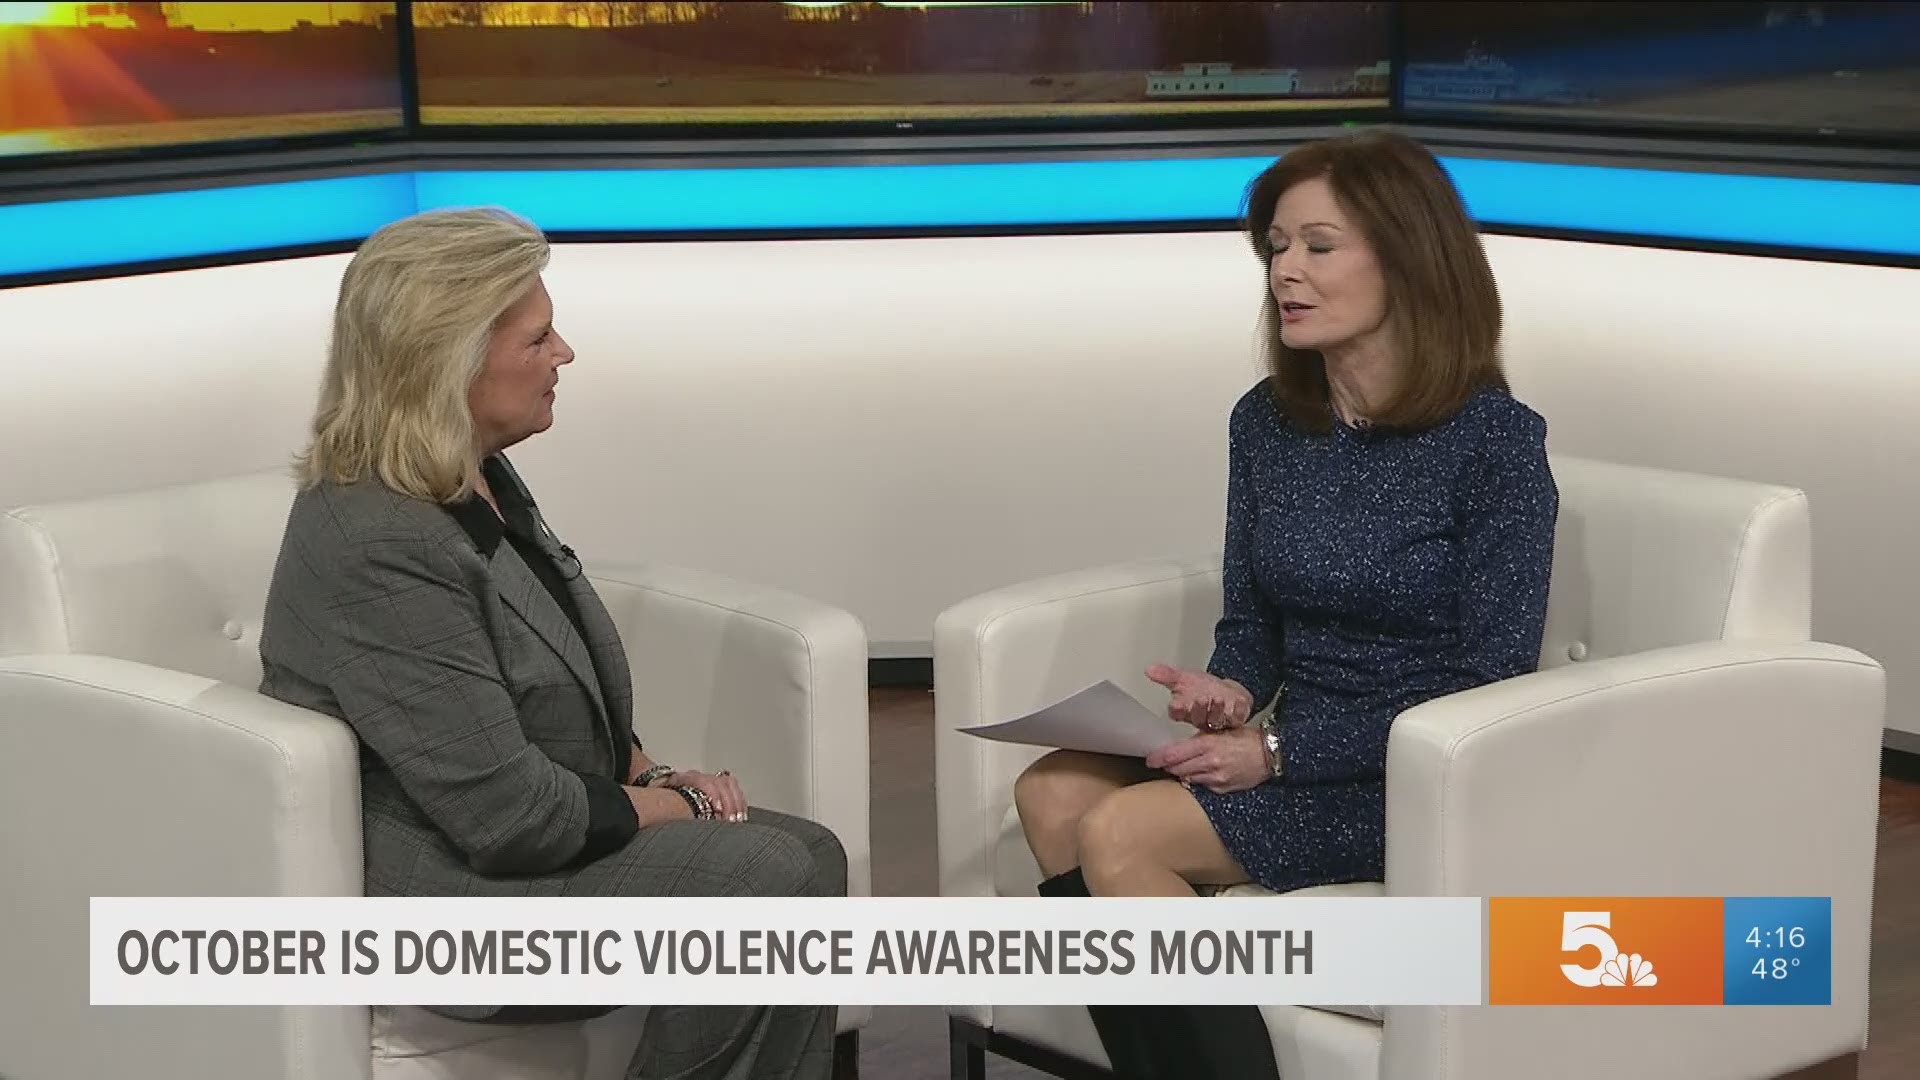 Susan Kidder, CEO of Safe Connections, joins us to talk about Domestic Violence Awareness Month being observed during October.